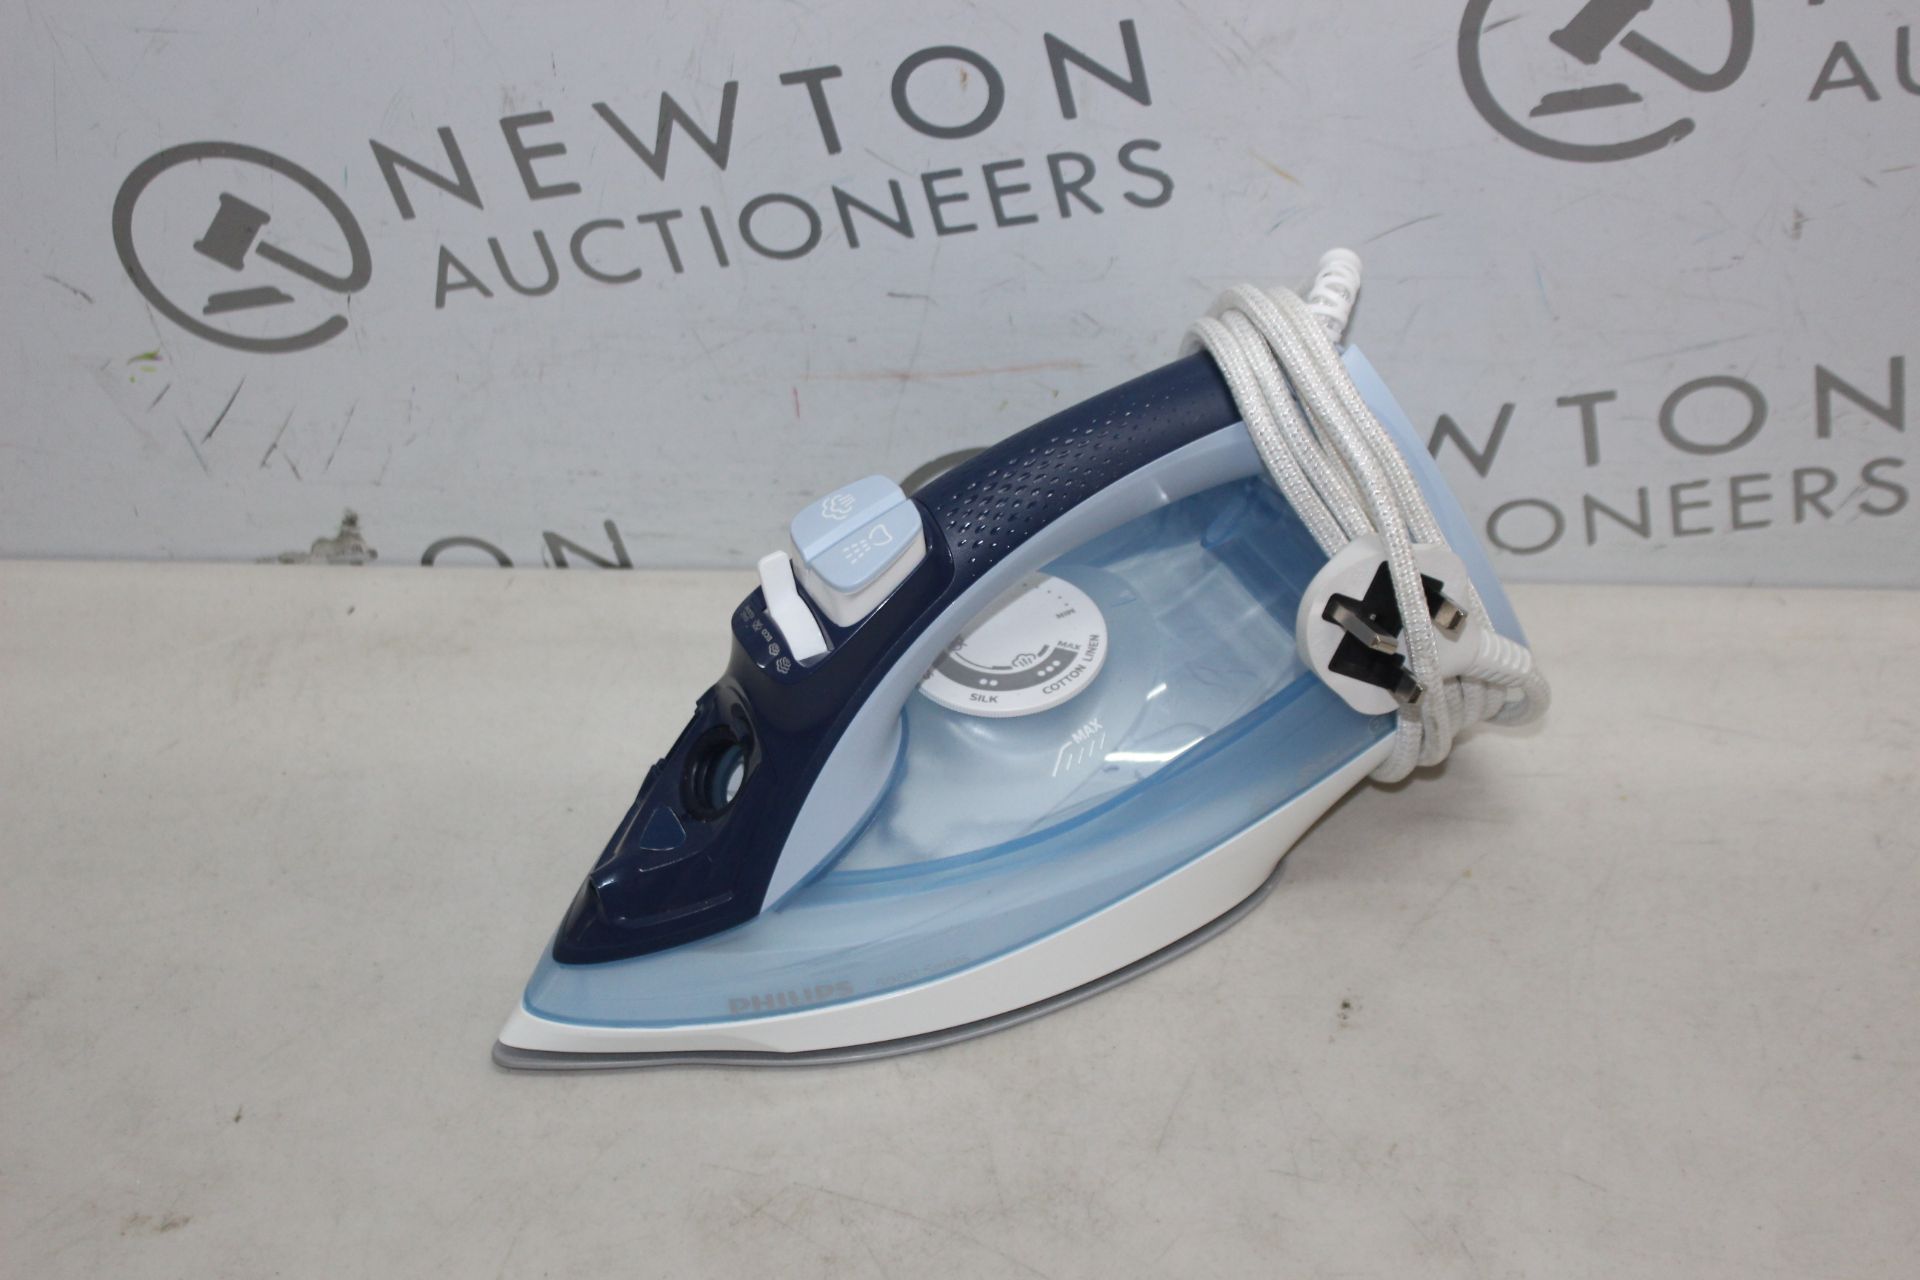 1 PHILIPS 5000 SERIES DST5020/21 IRON STEAM IRON STEAMGLIDE PLUS SOLEPLATE 2400 W RRP Â£59